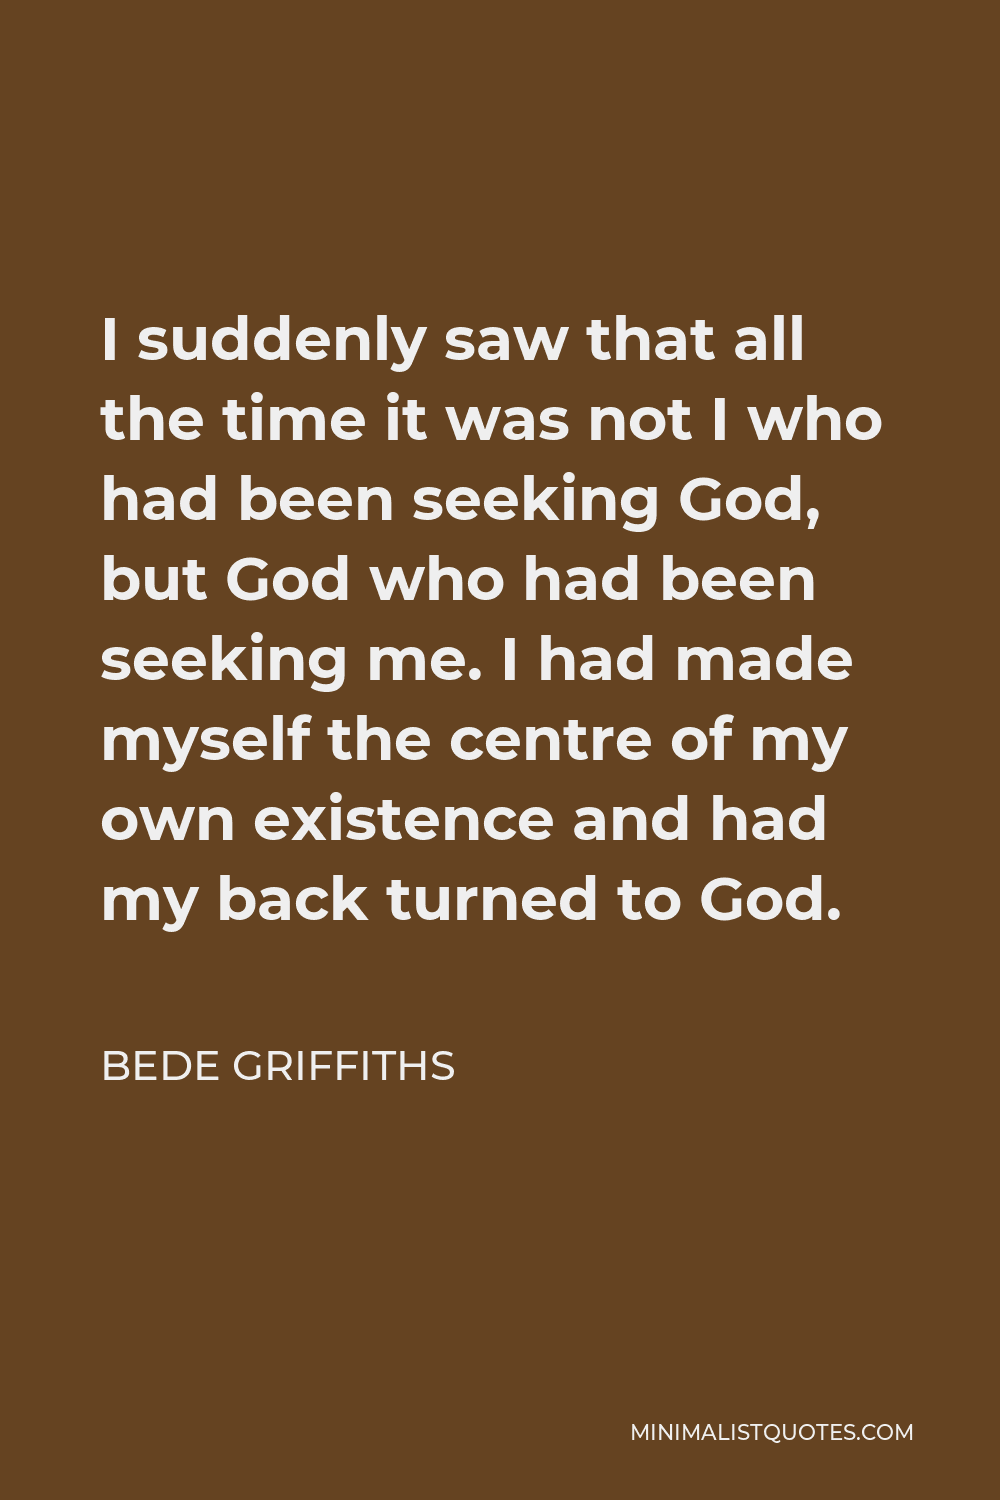 Bede Griffiths Quote - I suddenly saw that all the time it was not I who had been seeking God, but God who had been seeking me. I had made myself the centre of my own existence and had my back turned to God.